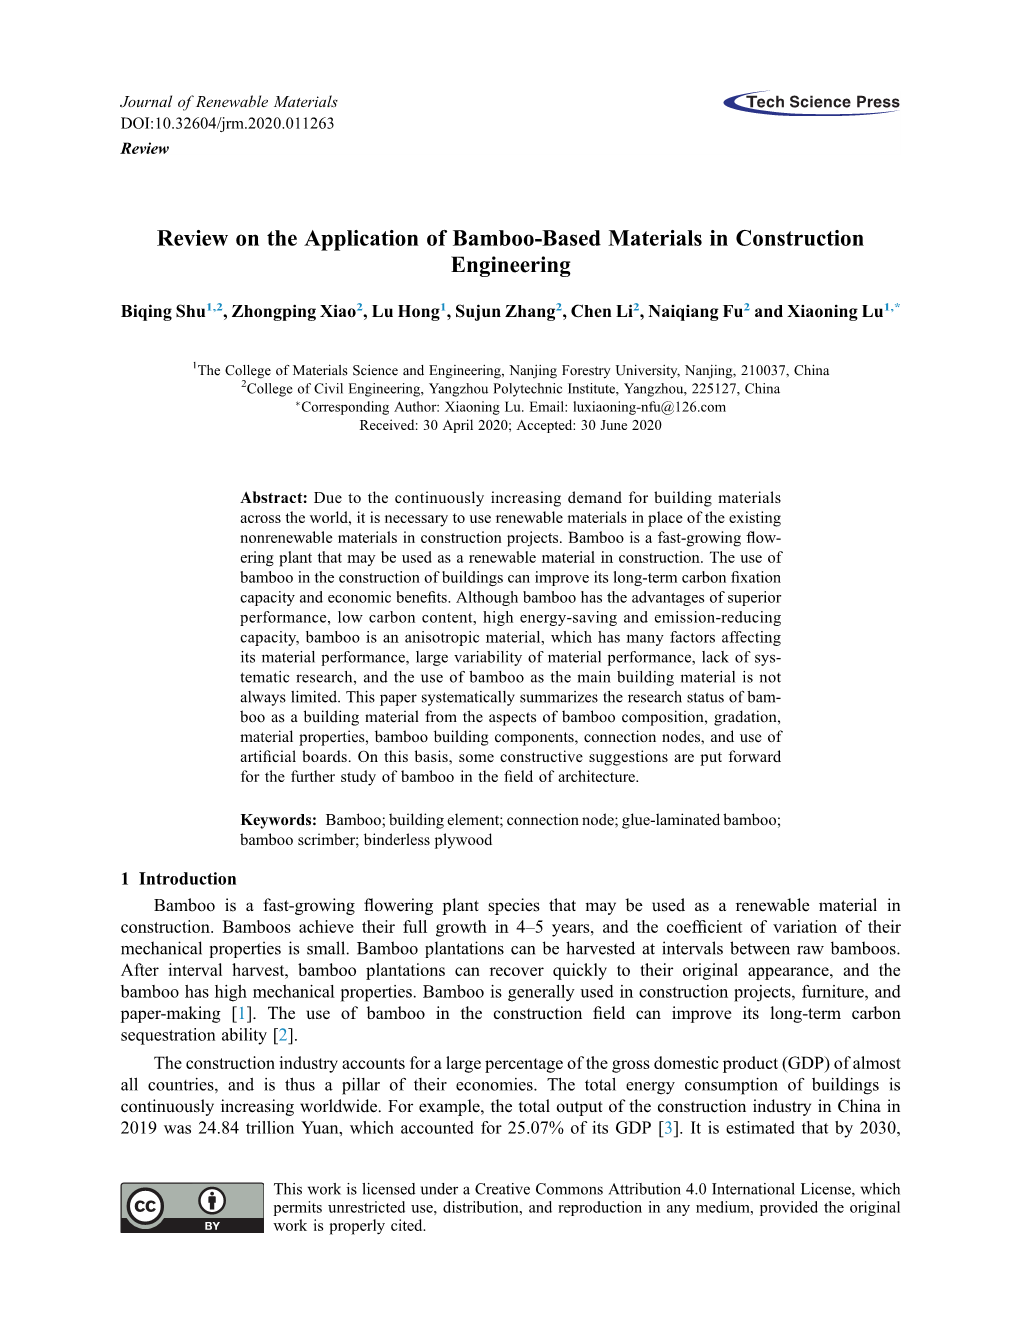 Review on the Application of Bamboo-Based Materials in Construction Engineering